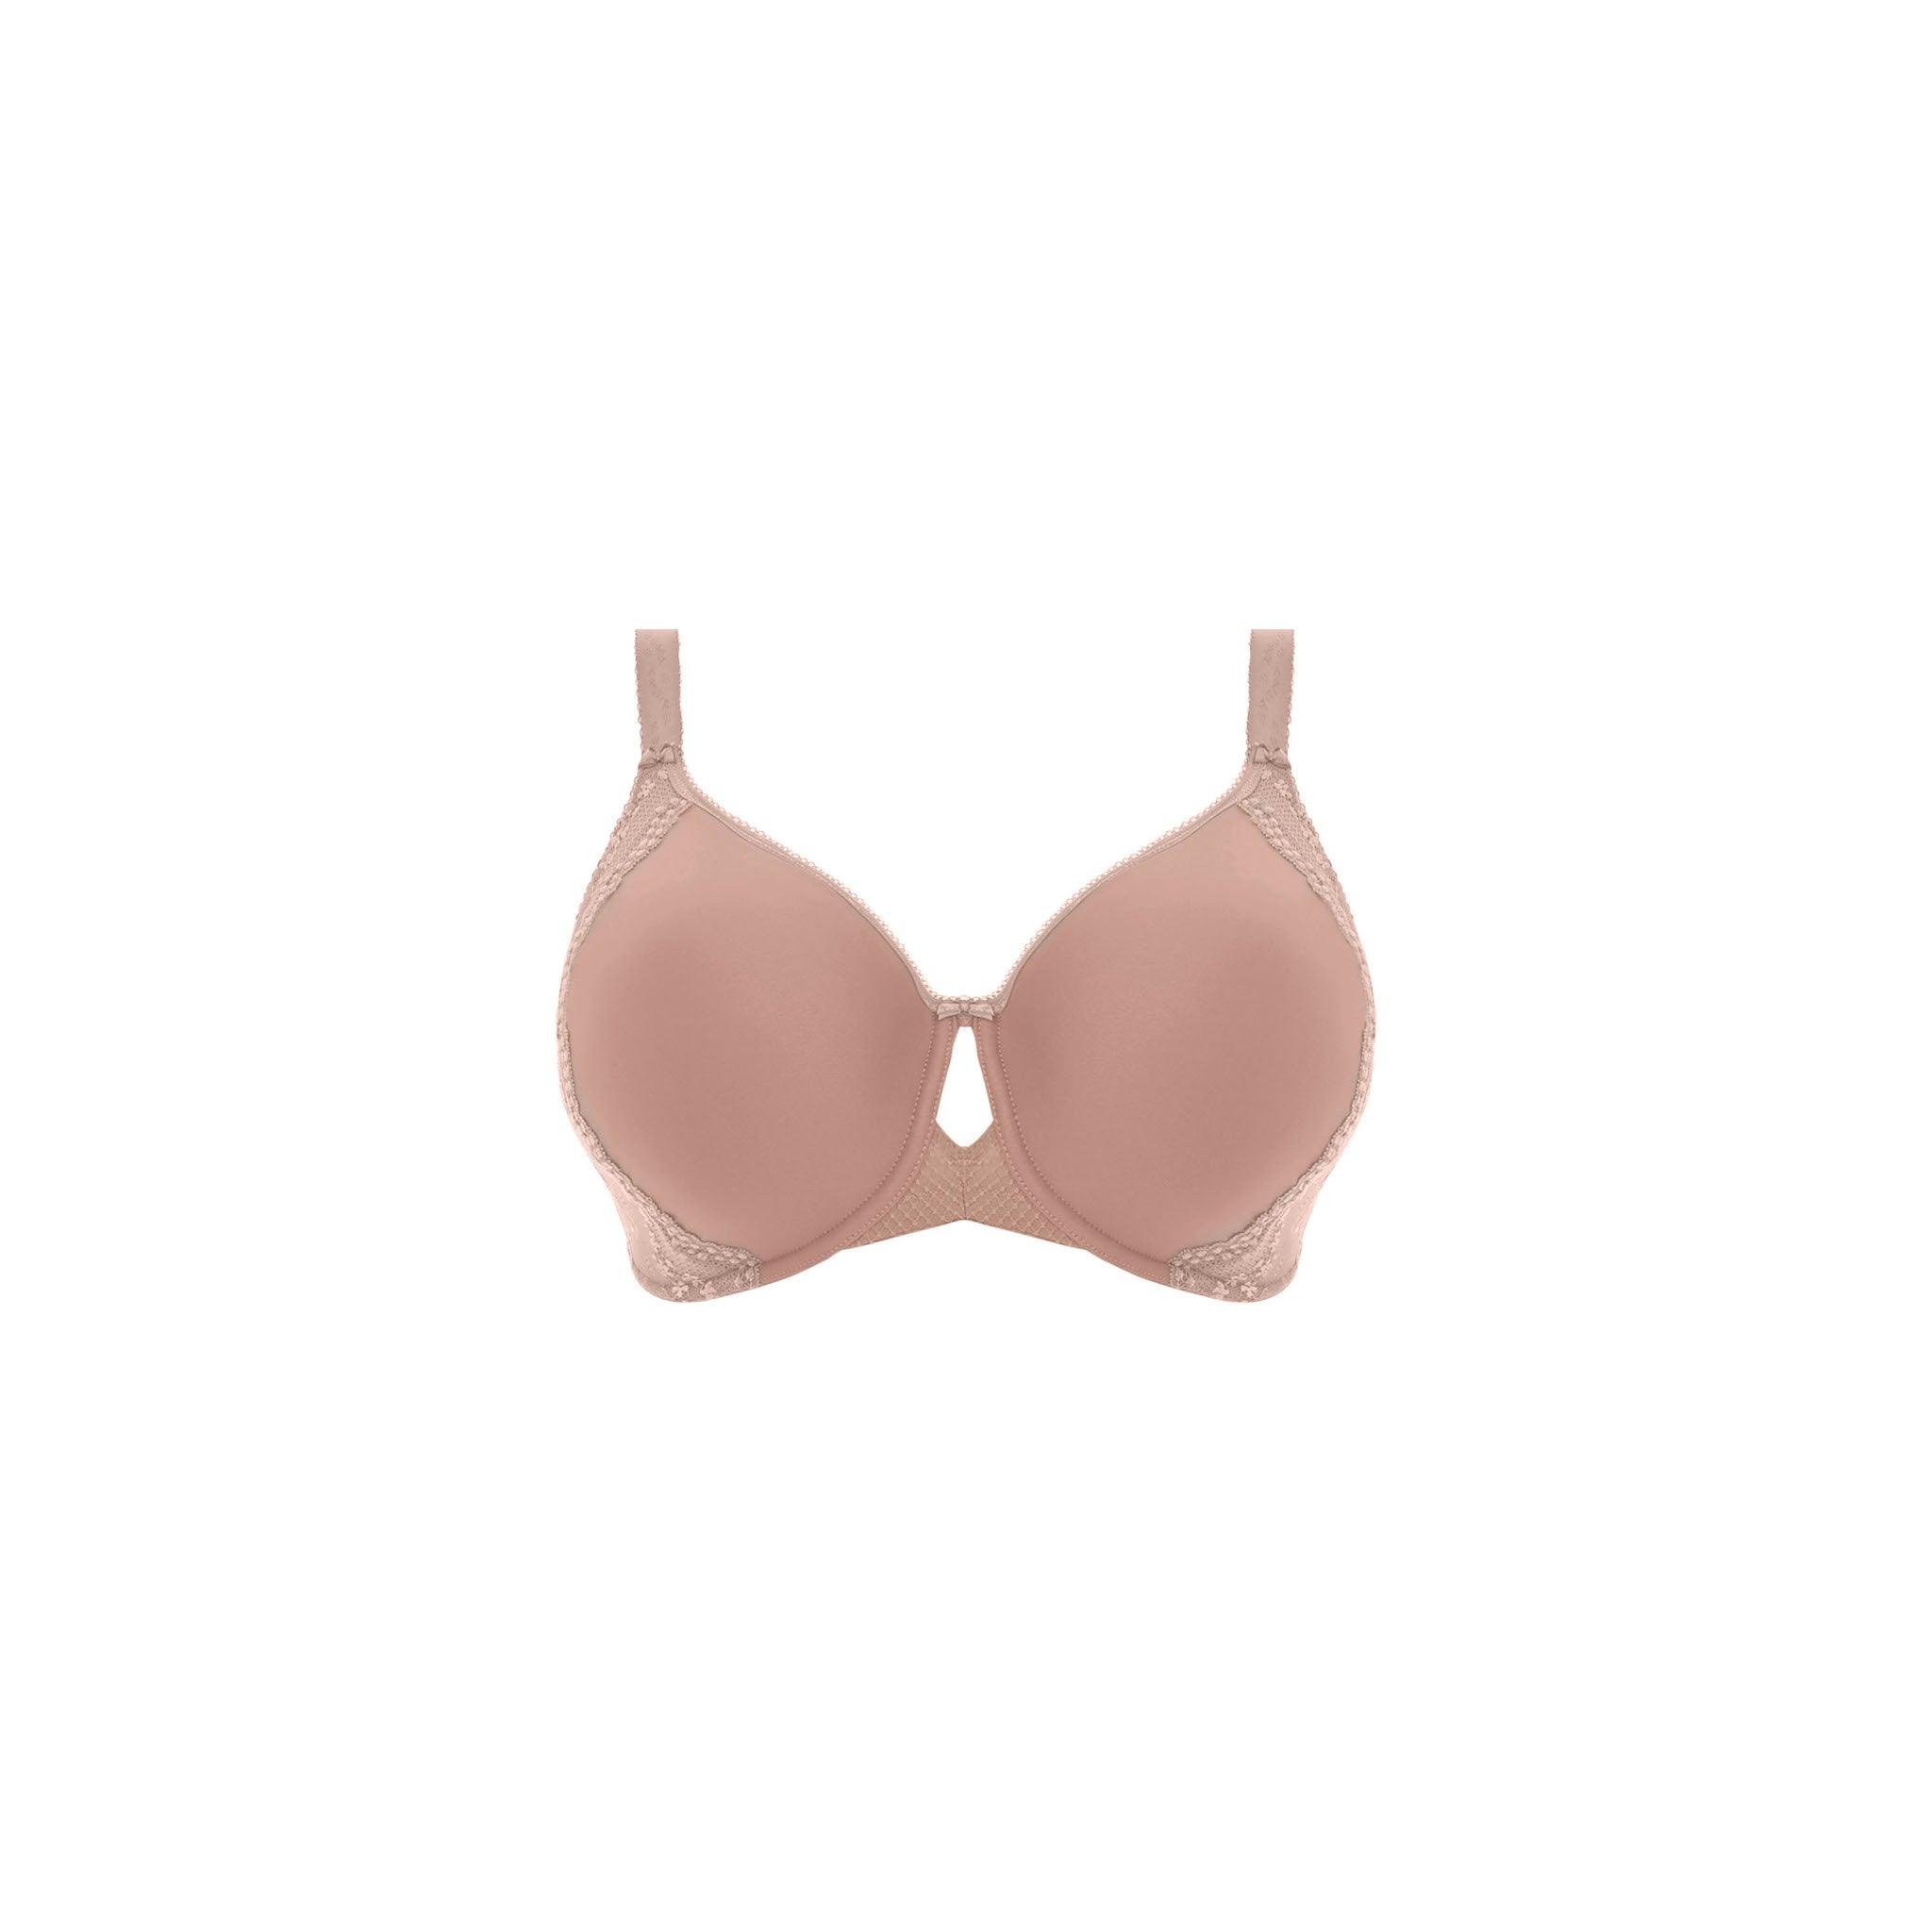 Elomi "Charley" UW Moulded Spacer Bra (DD-HH) - Lion's Lair Boutique - 34, 36, 38, 40, 42, 44, 46, Charley, continuity, DD, E, elomi, F, FF, G, GG, H, HH, lingerie, SPC - Elomi